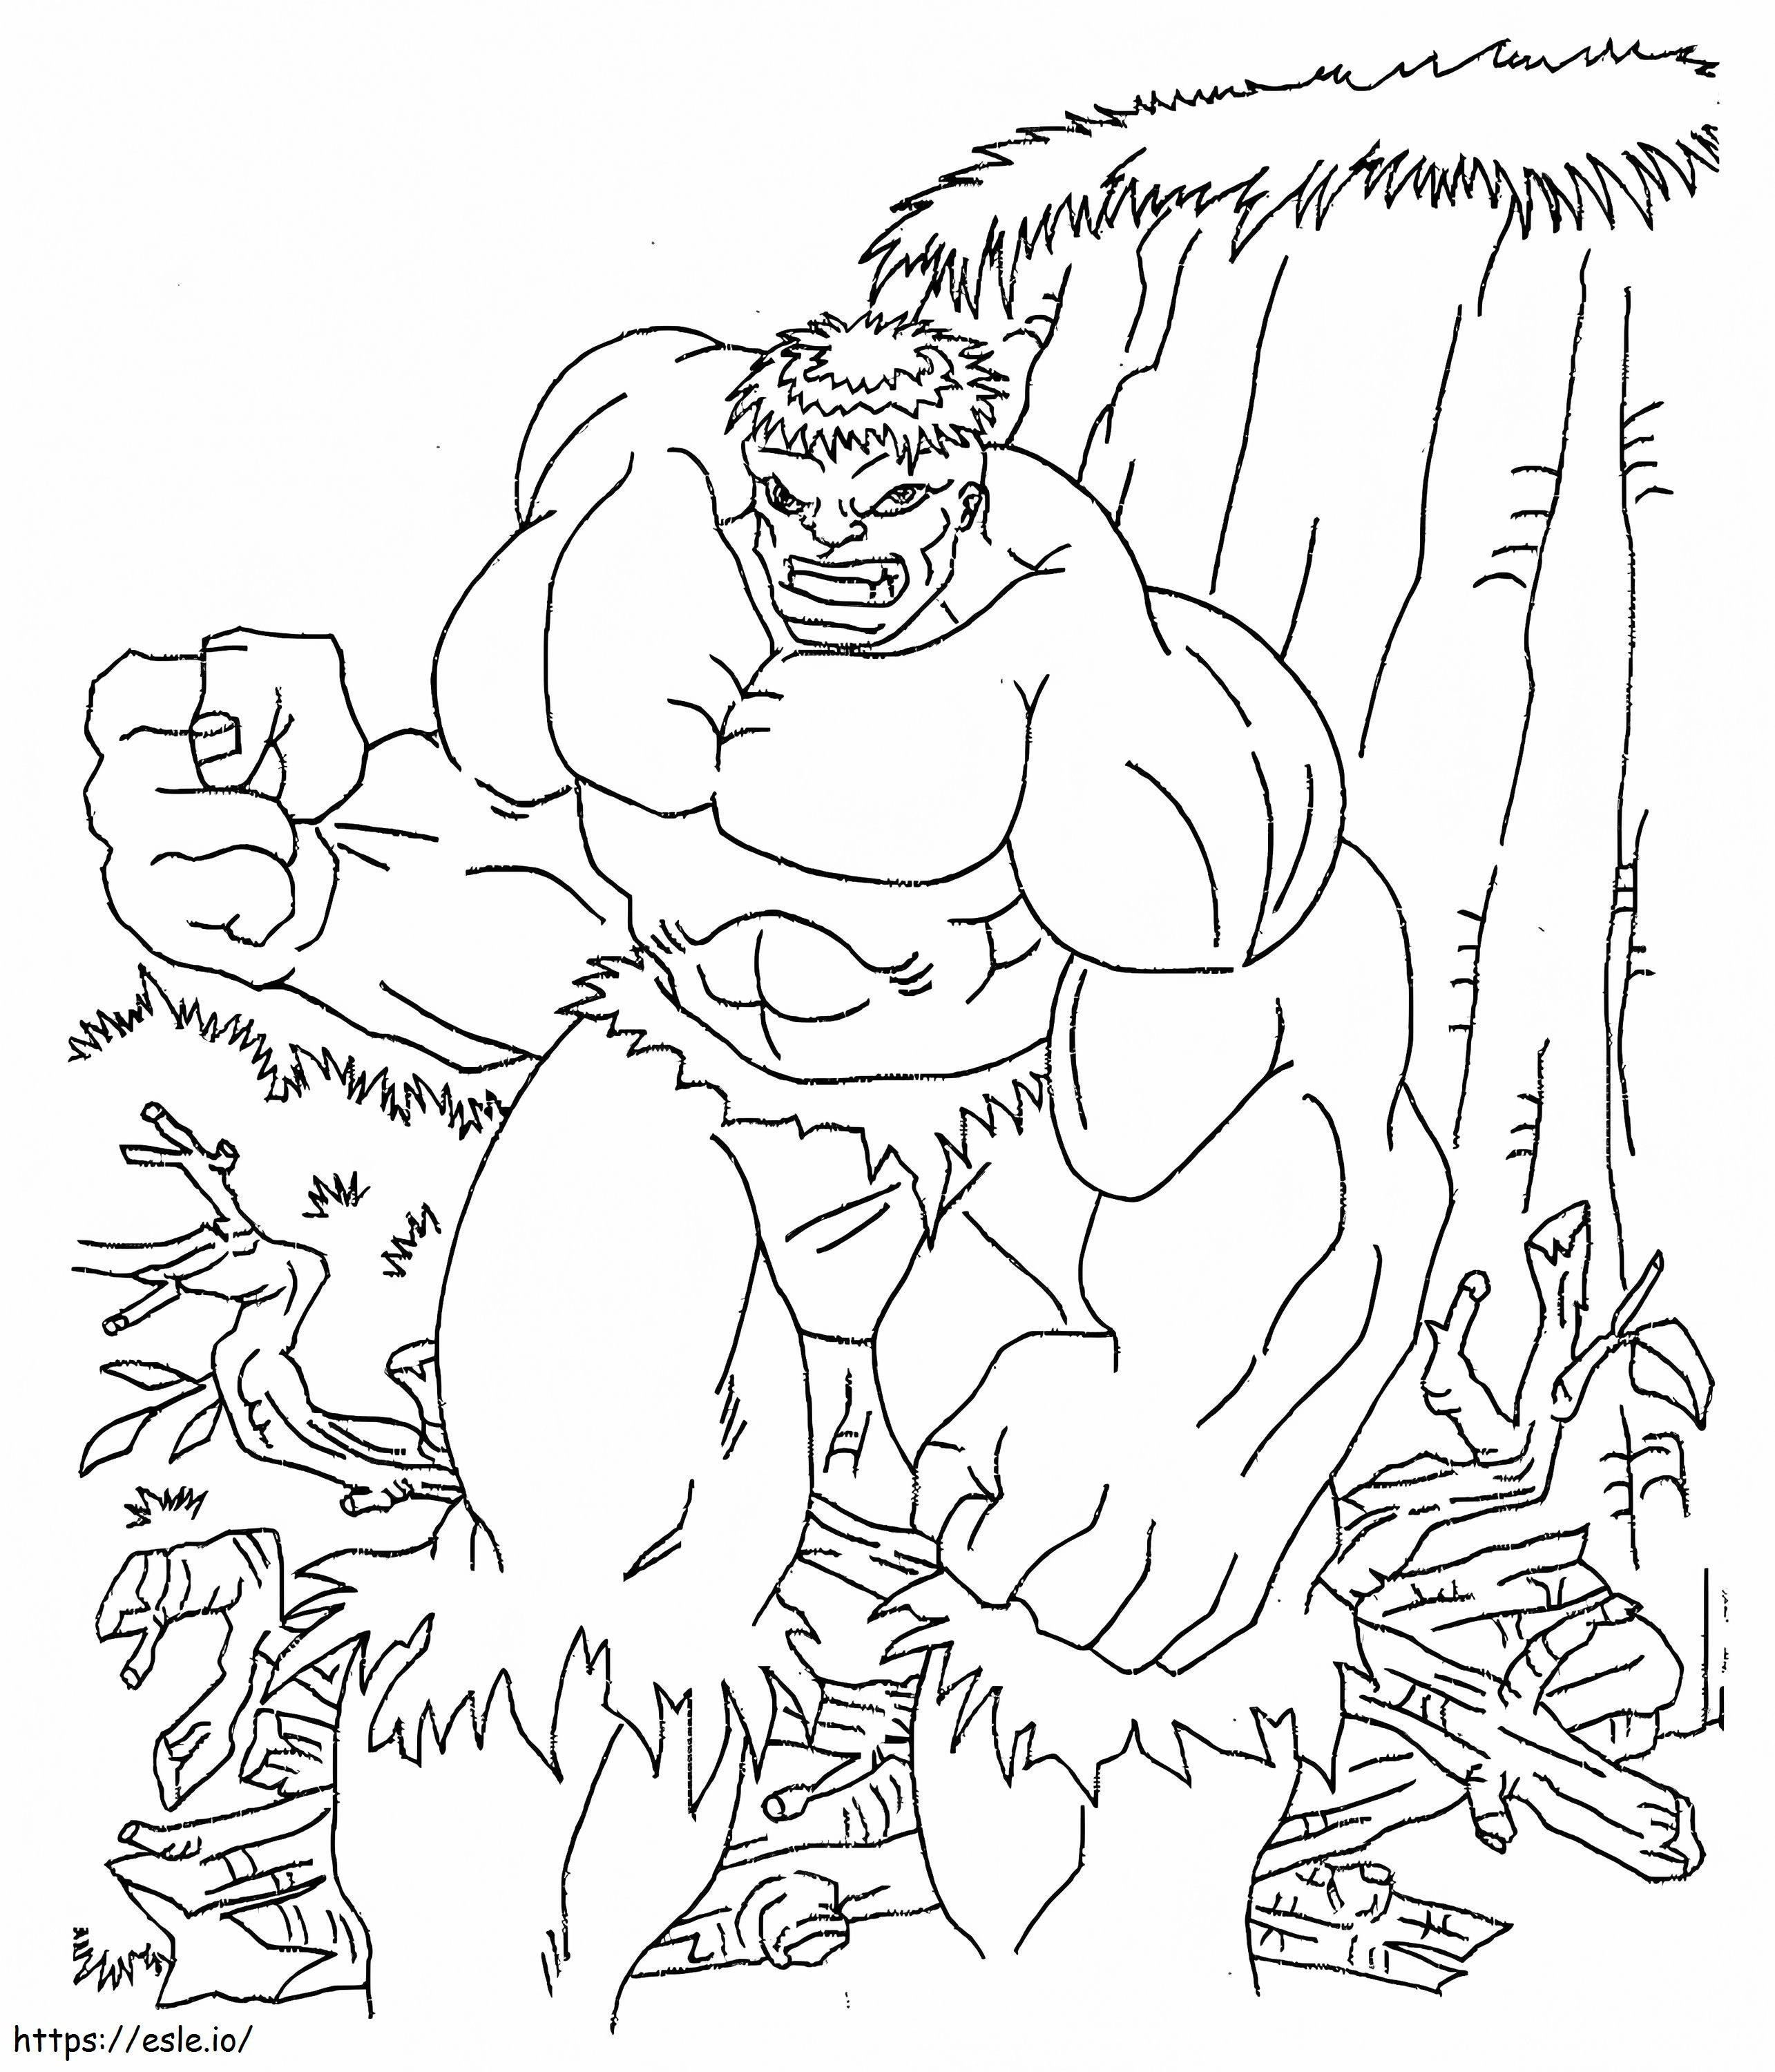 Hulk In The Forest coloring page